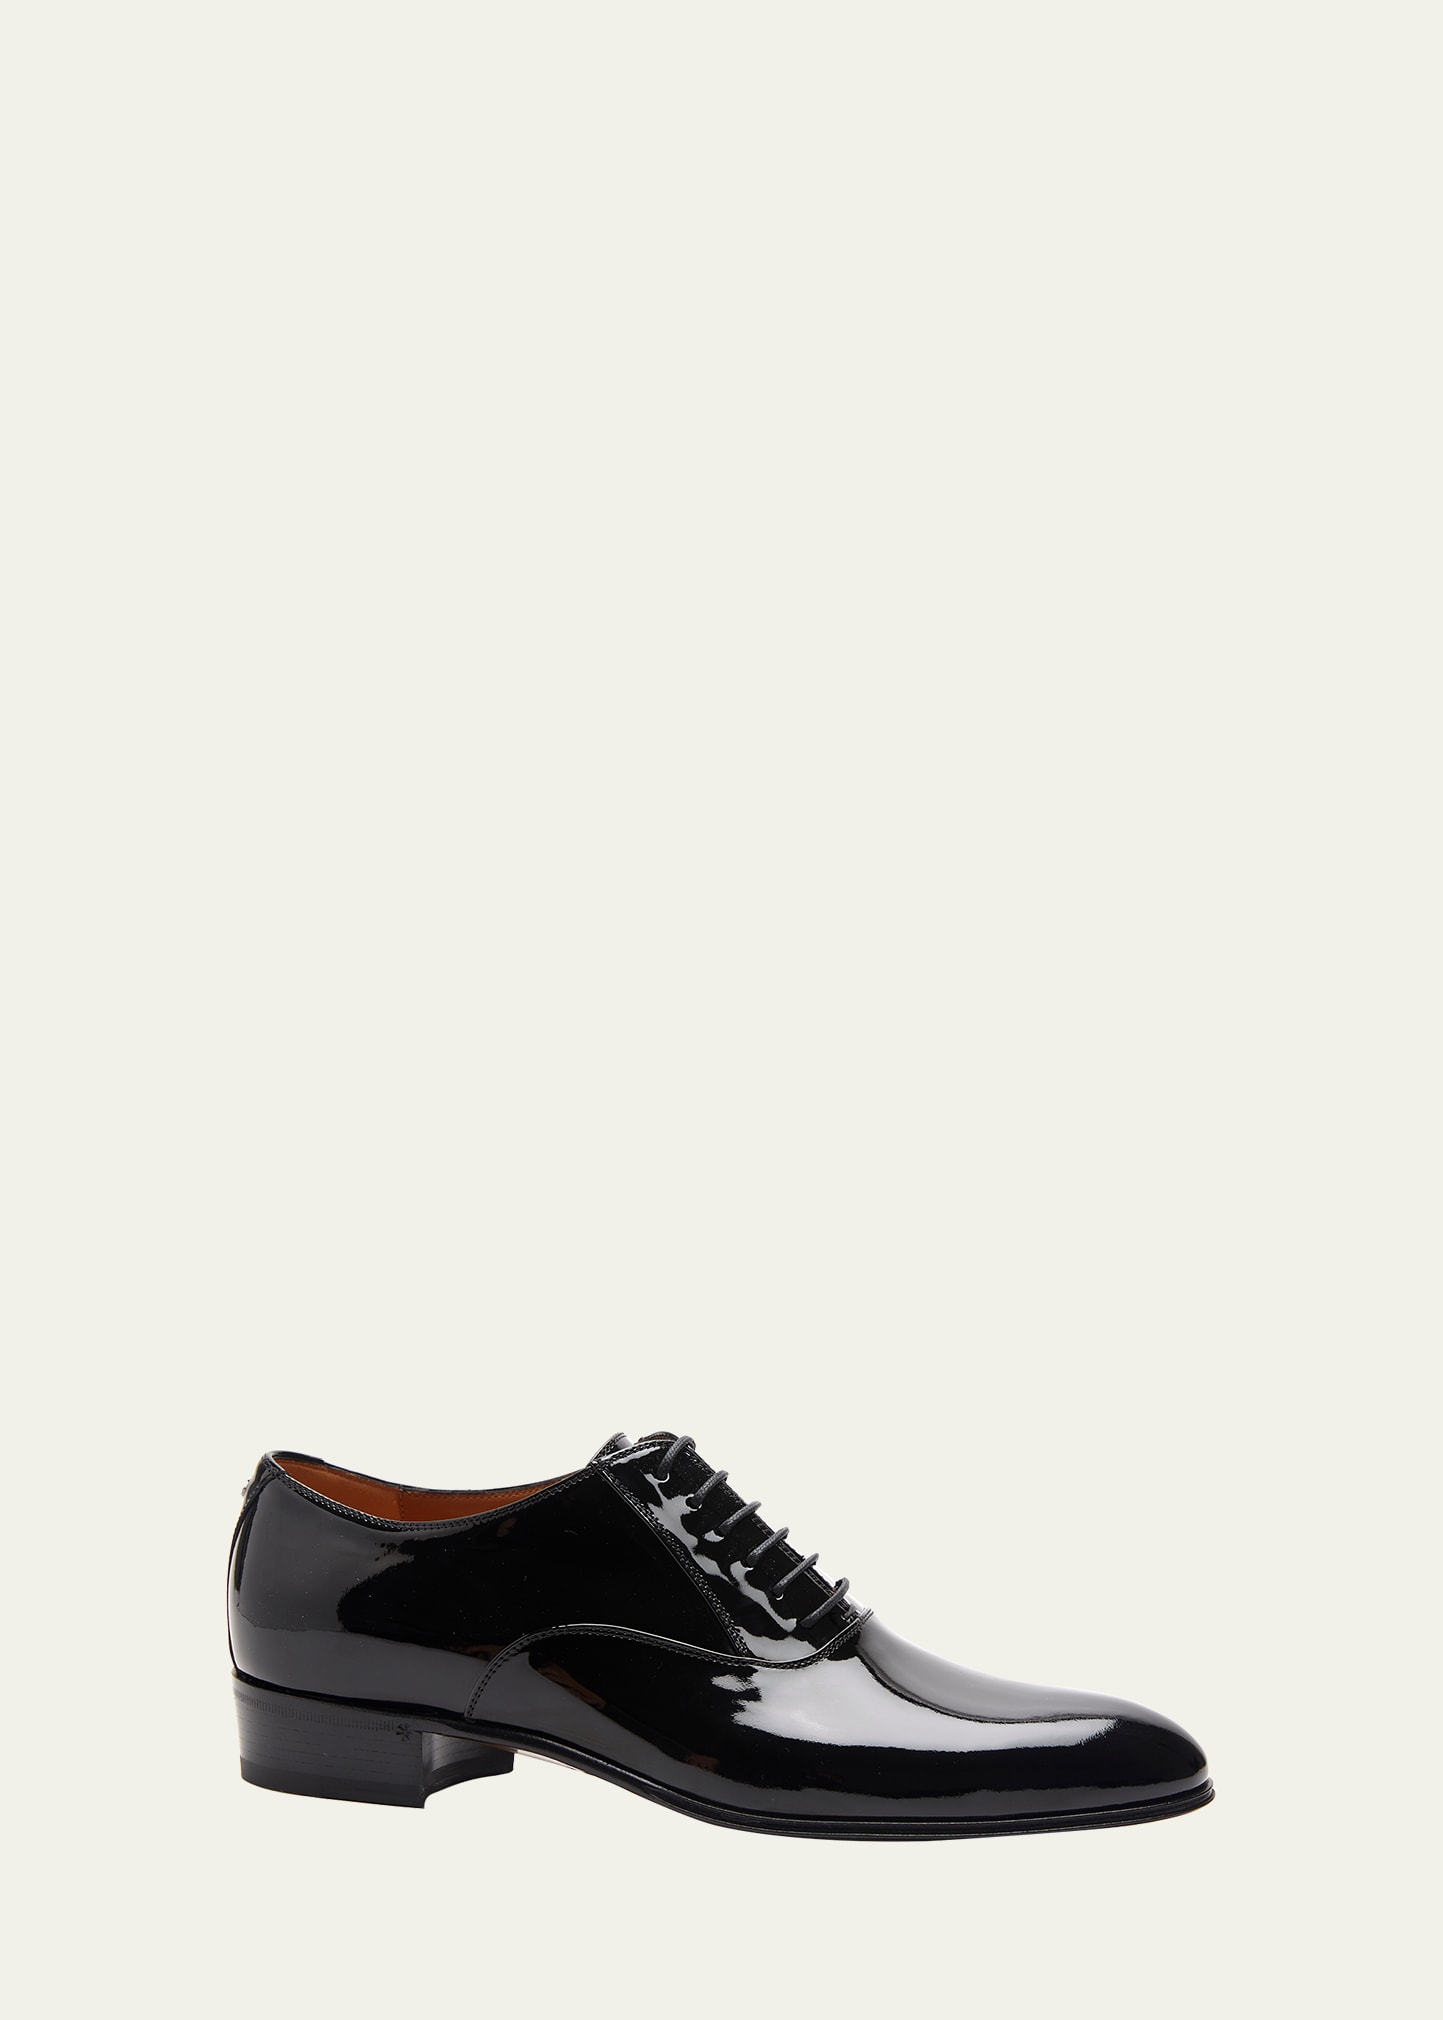 Gucci Men's Worsh Patent Leather Oxfords In Black